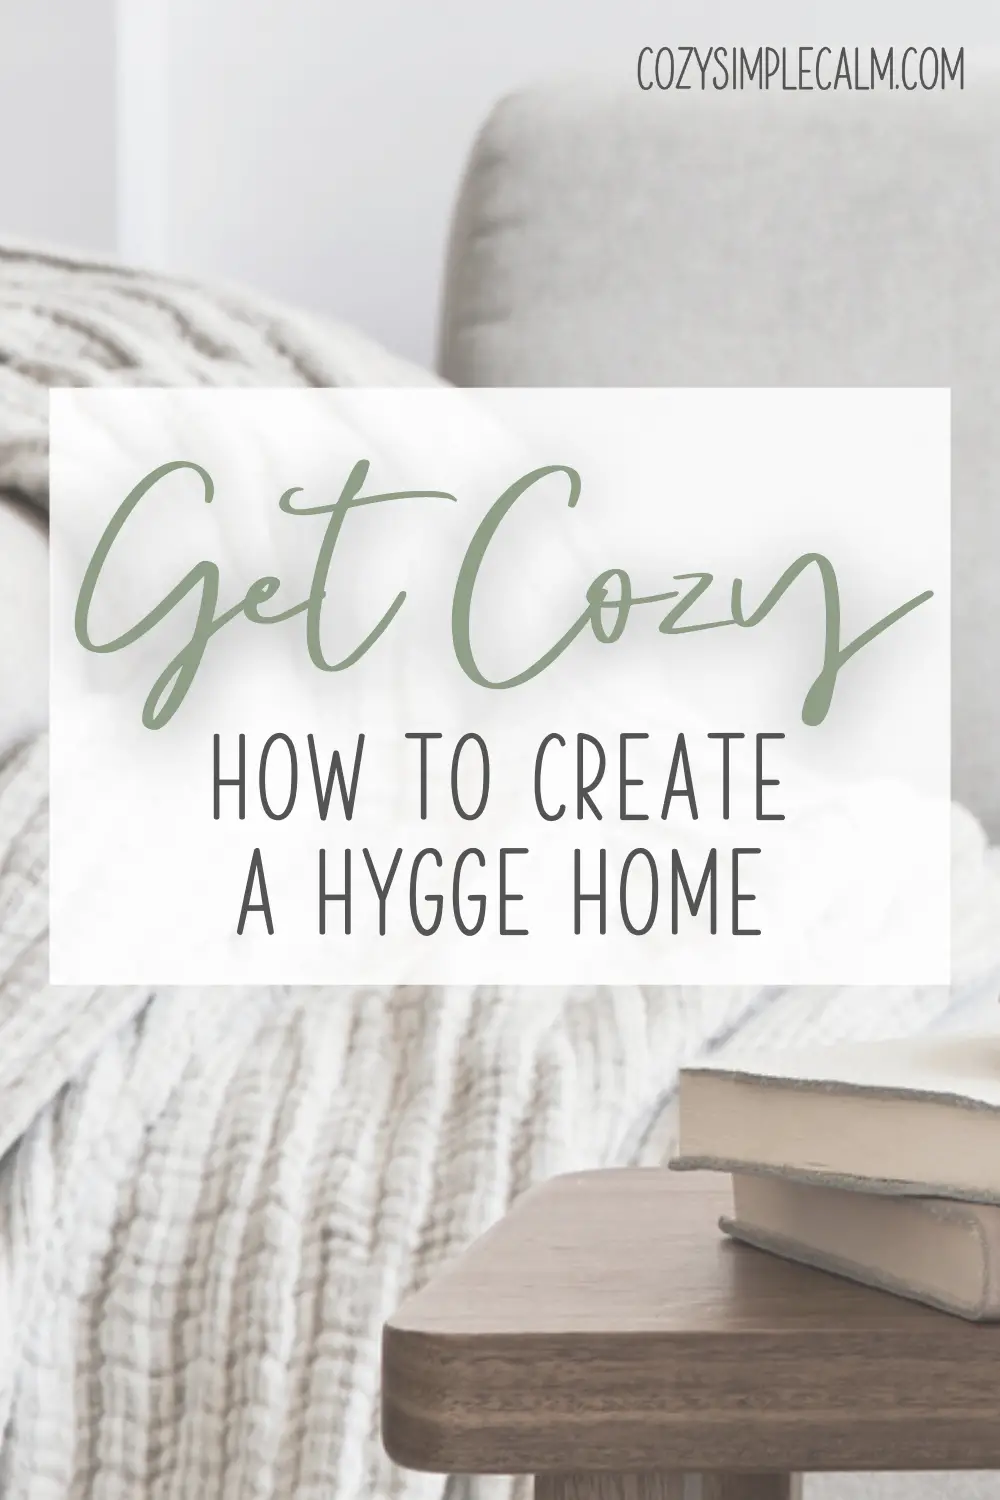 Get Cozy - How to create a hygge home